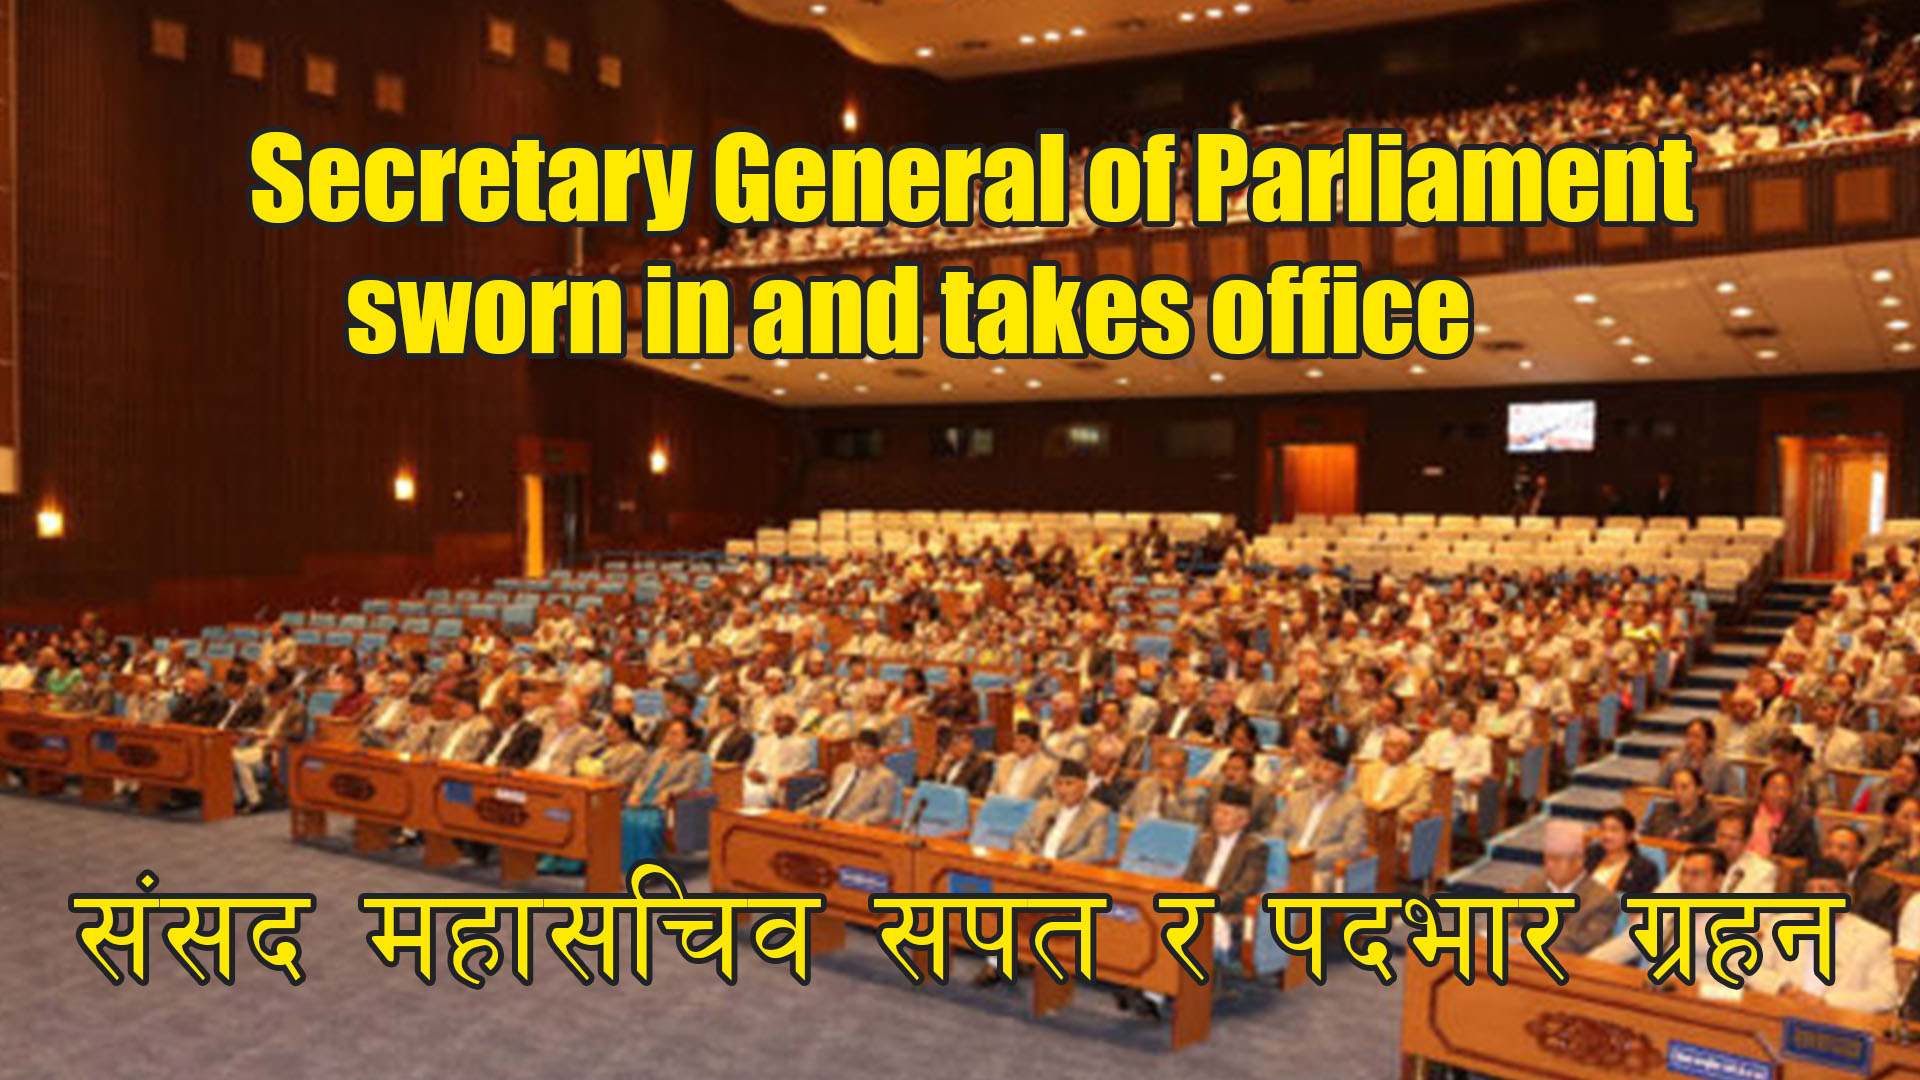 Secretary General of Parliament sworn in and takes office